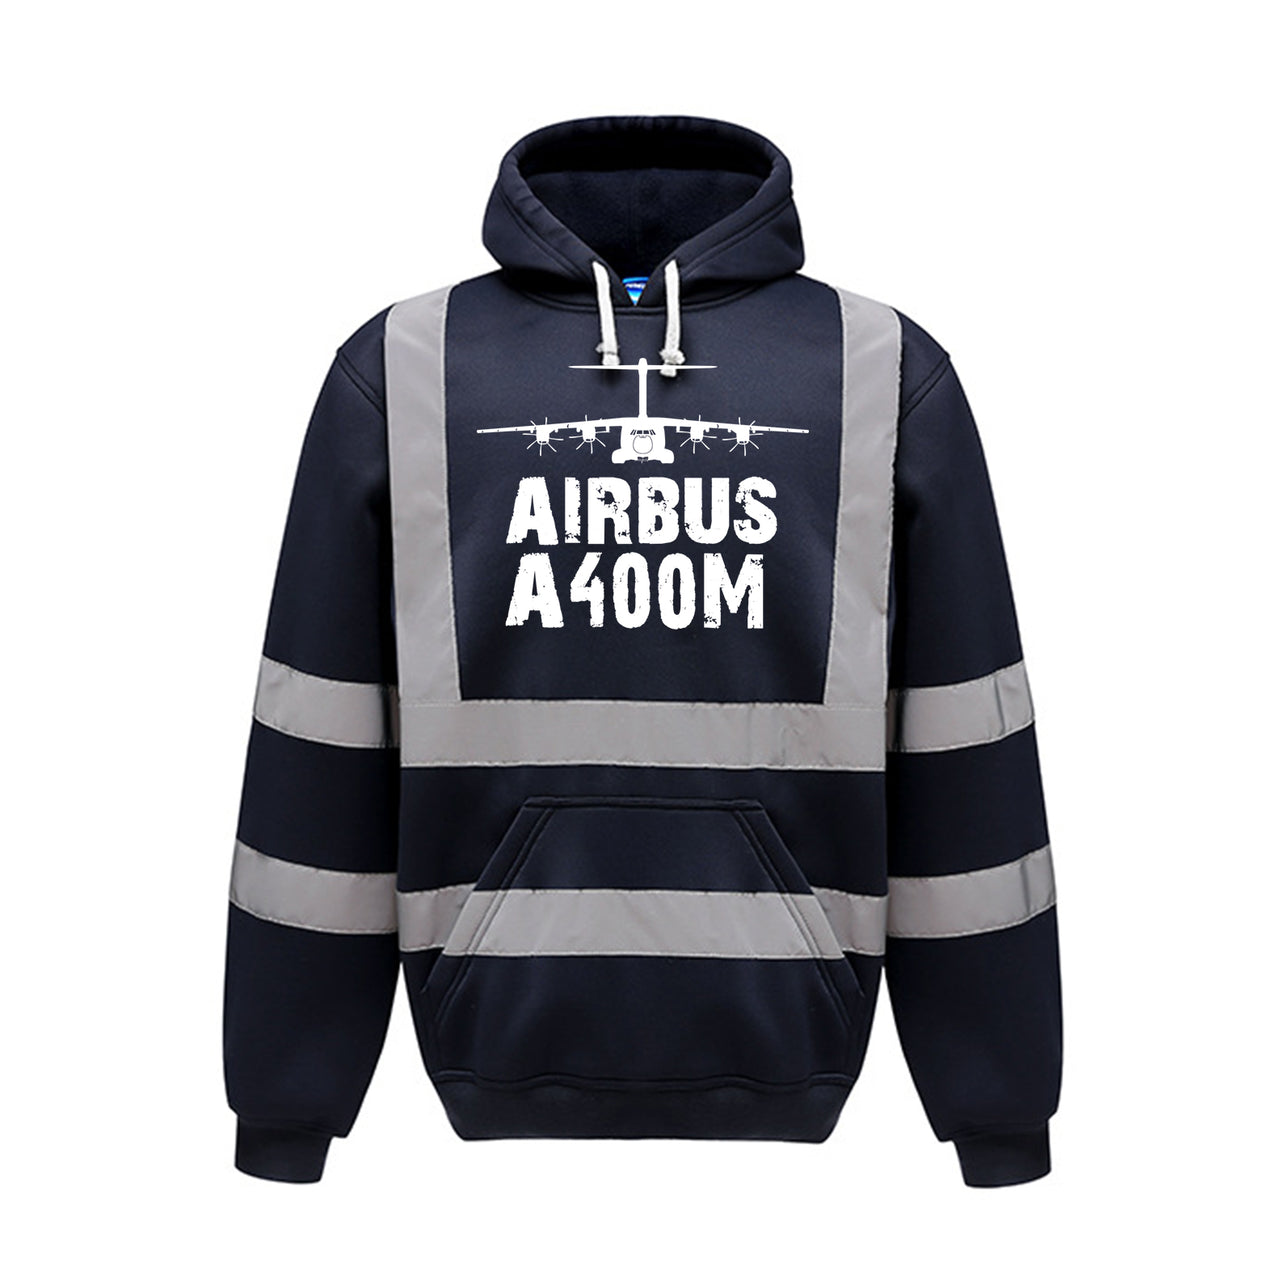 Airbus A400M & Plane Designed Reflective Hoodies